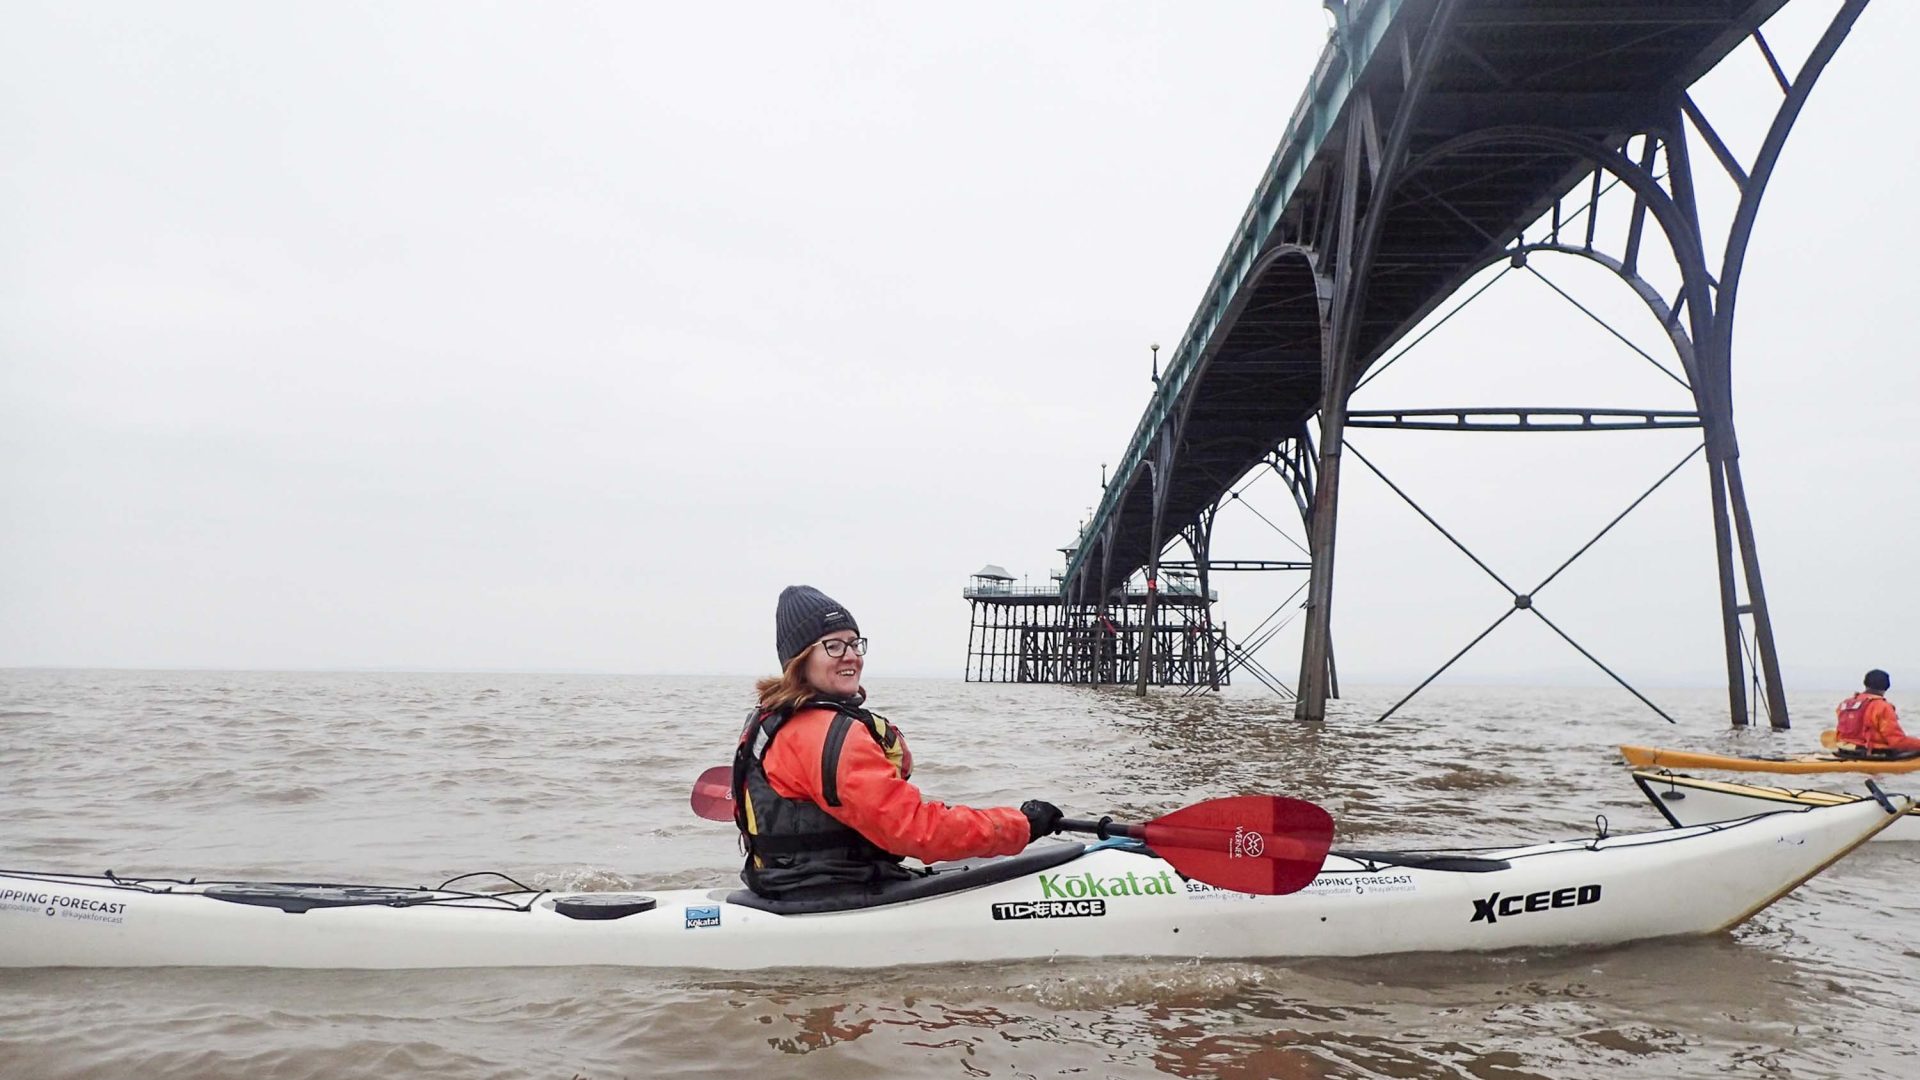 A woman looks to the camera and smiles as she pauses her kayak below a bridge.